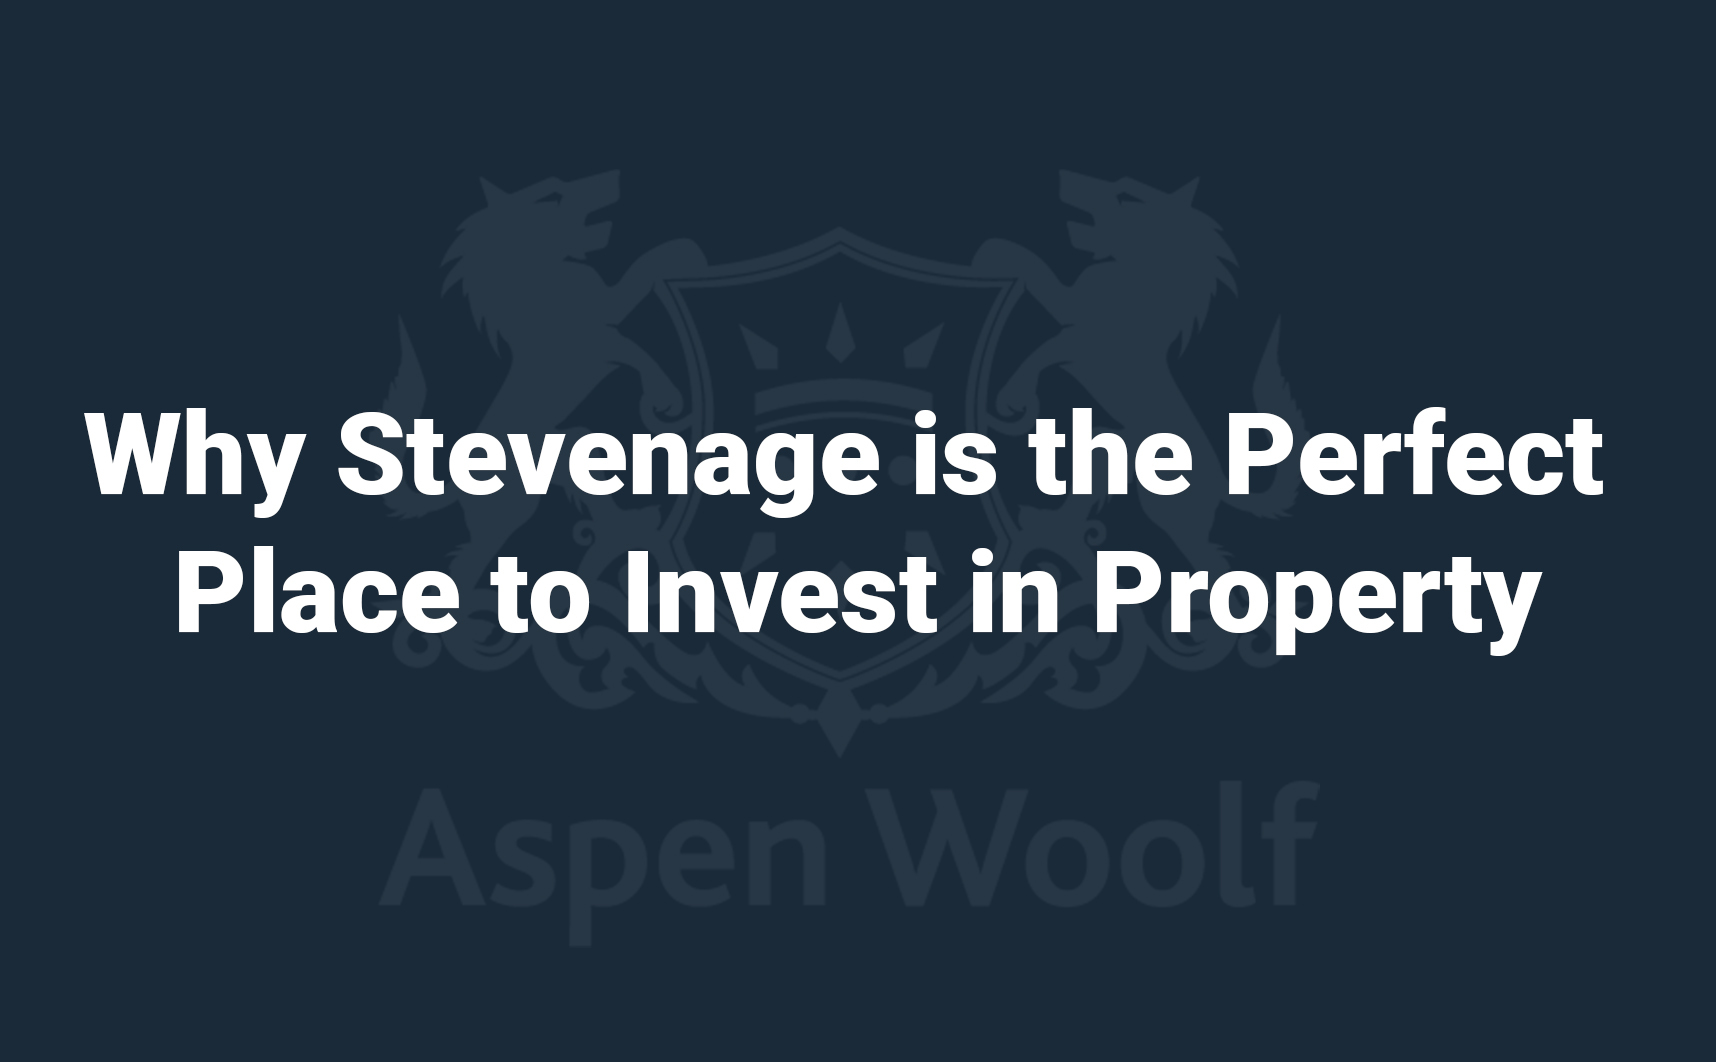 Why Stevenage is the Perfect Place to Invest in Property